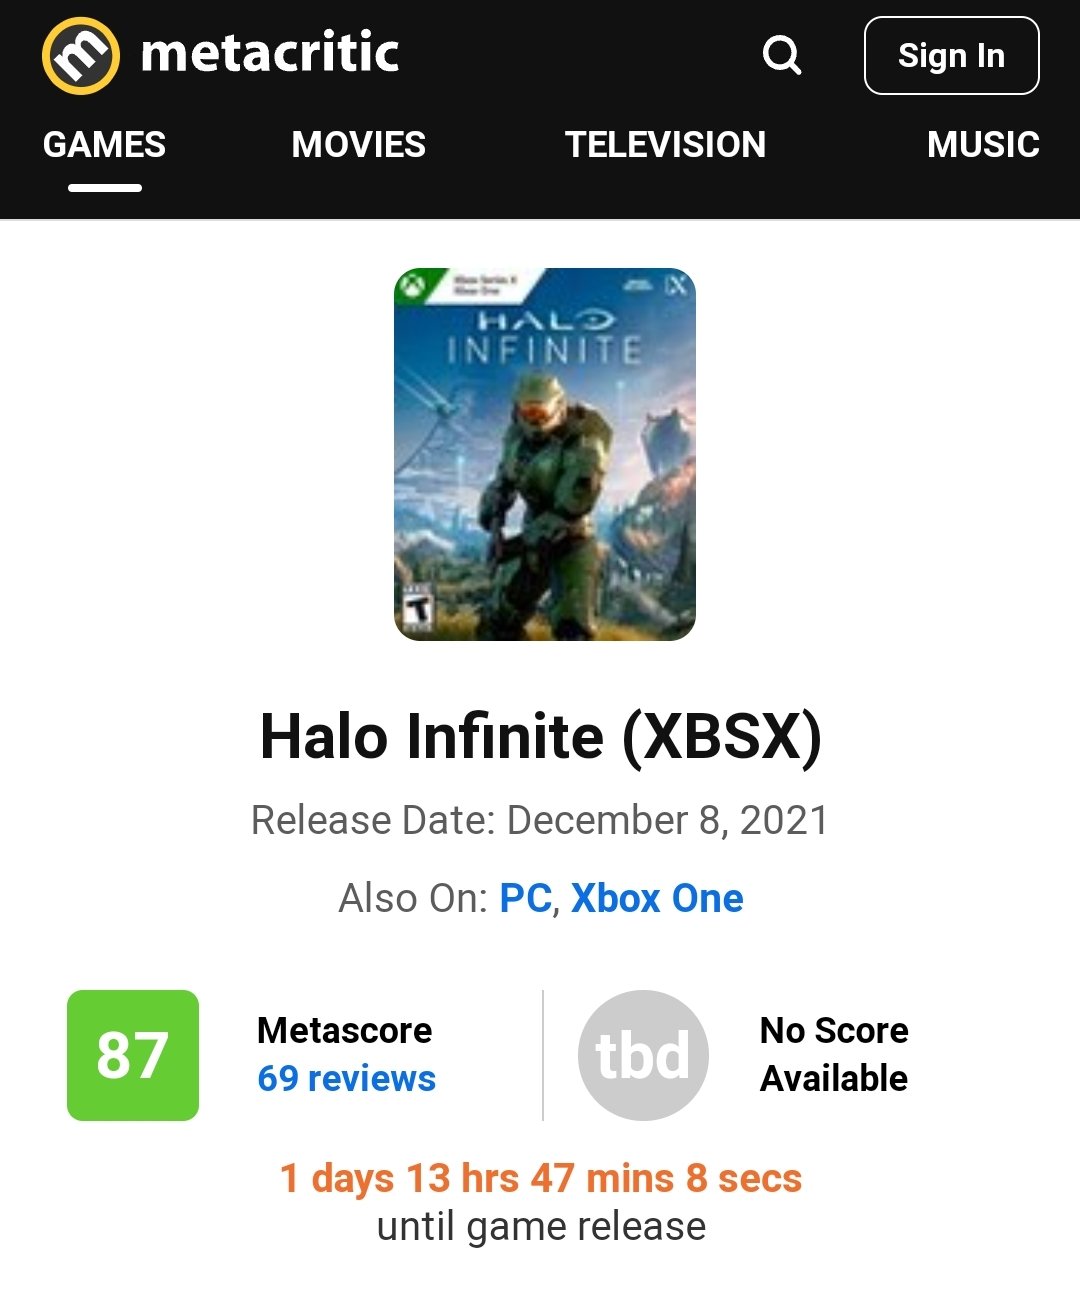 metacritic on X: The Best-Reviewed Xbox Series X Games of 2021 so far:   #11 - Halo Infinite [87]  /  X